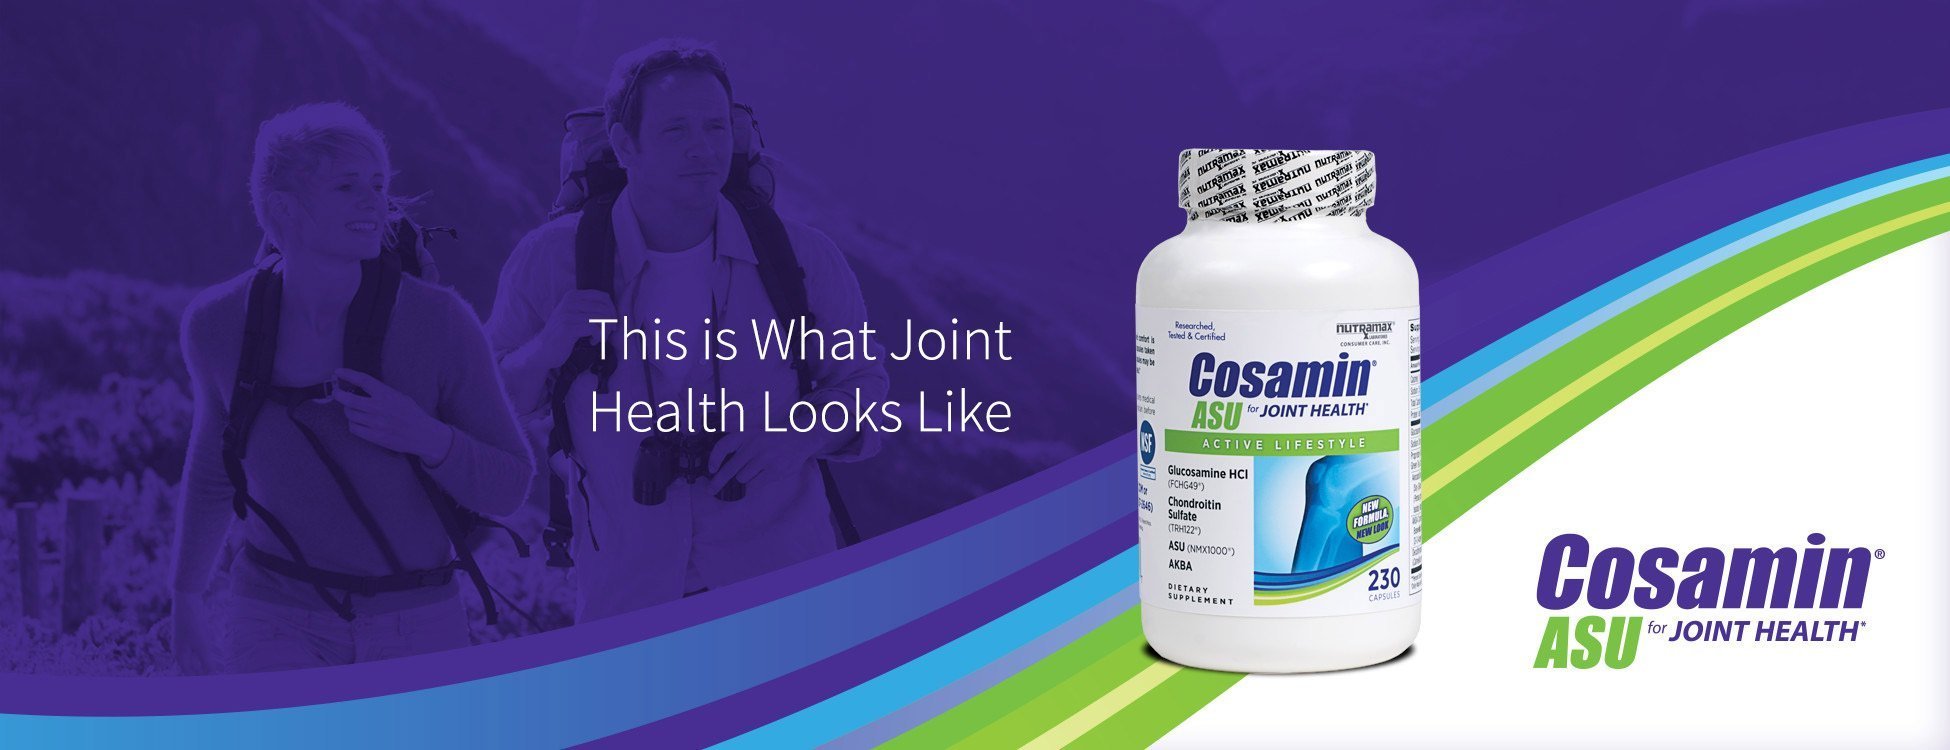 Cosamin is what Joint Health looks like.